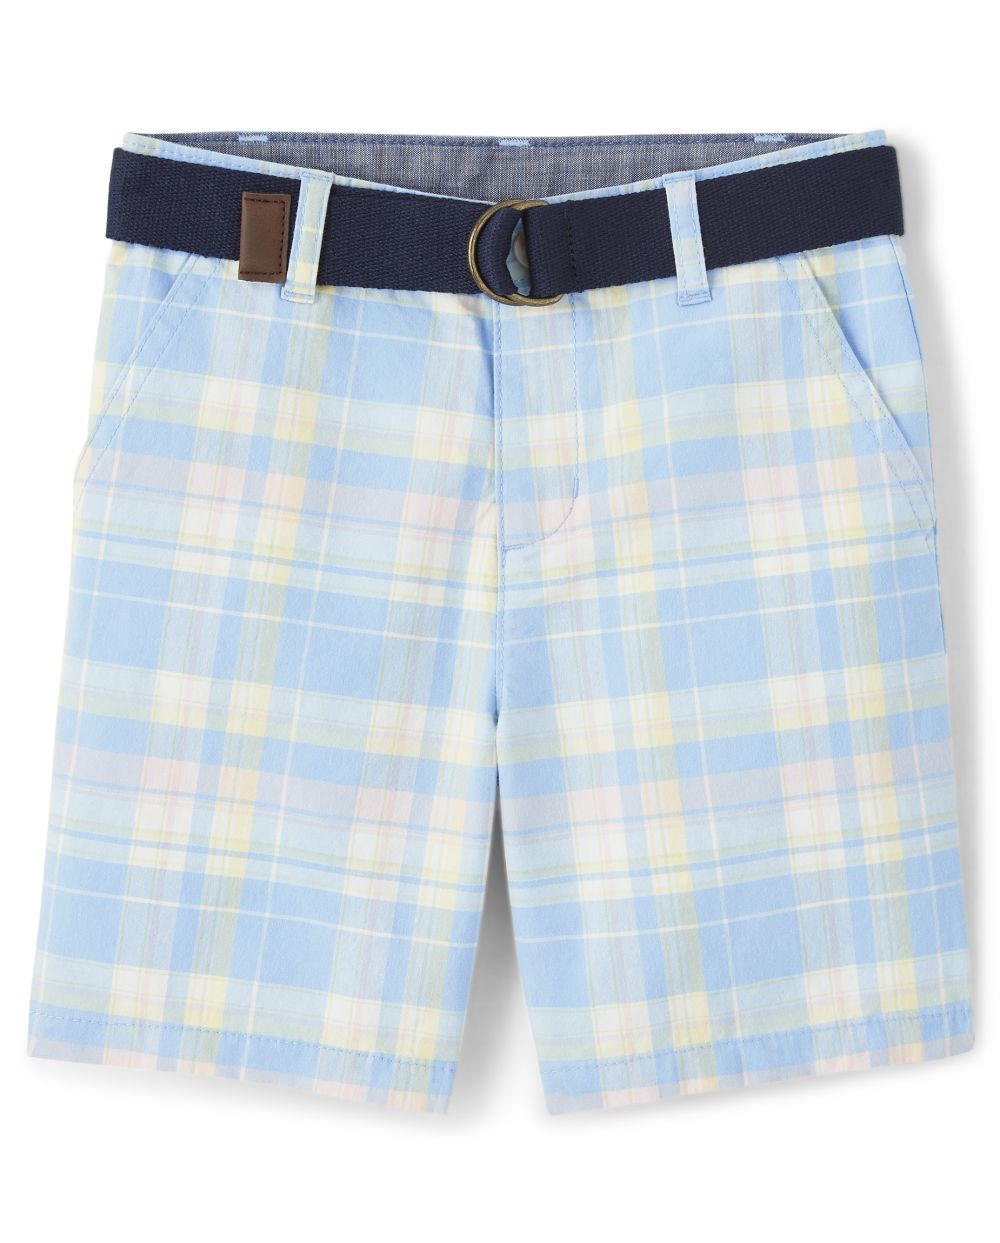 Toddler boys blue and yellow plaid belted shorts